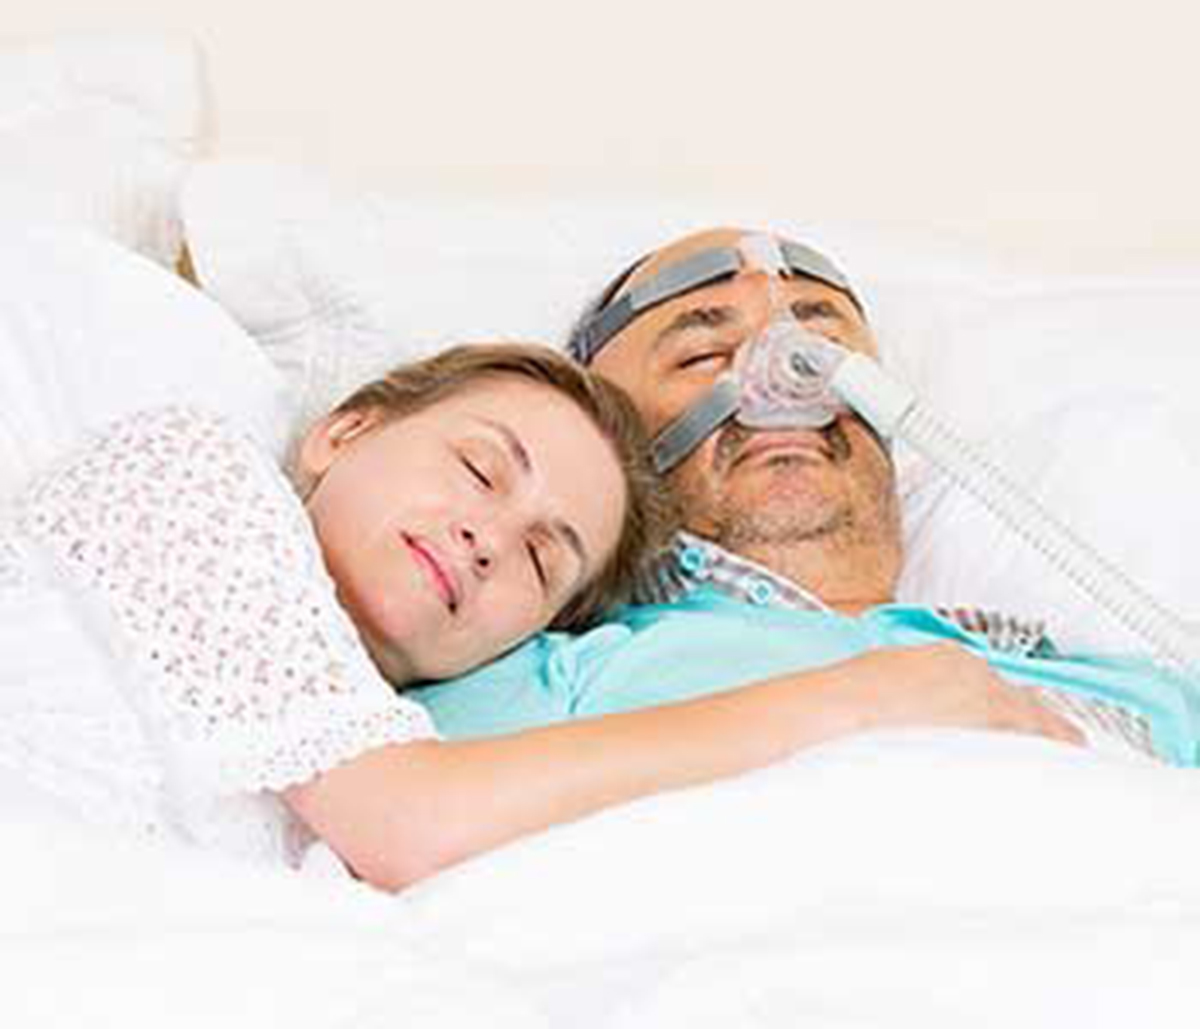 Does sleep apnea cause low blood oxygen levels while sleeping